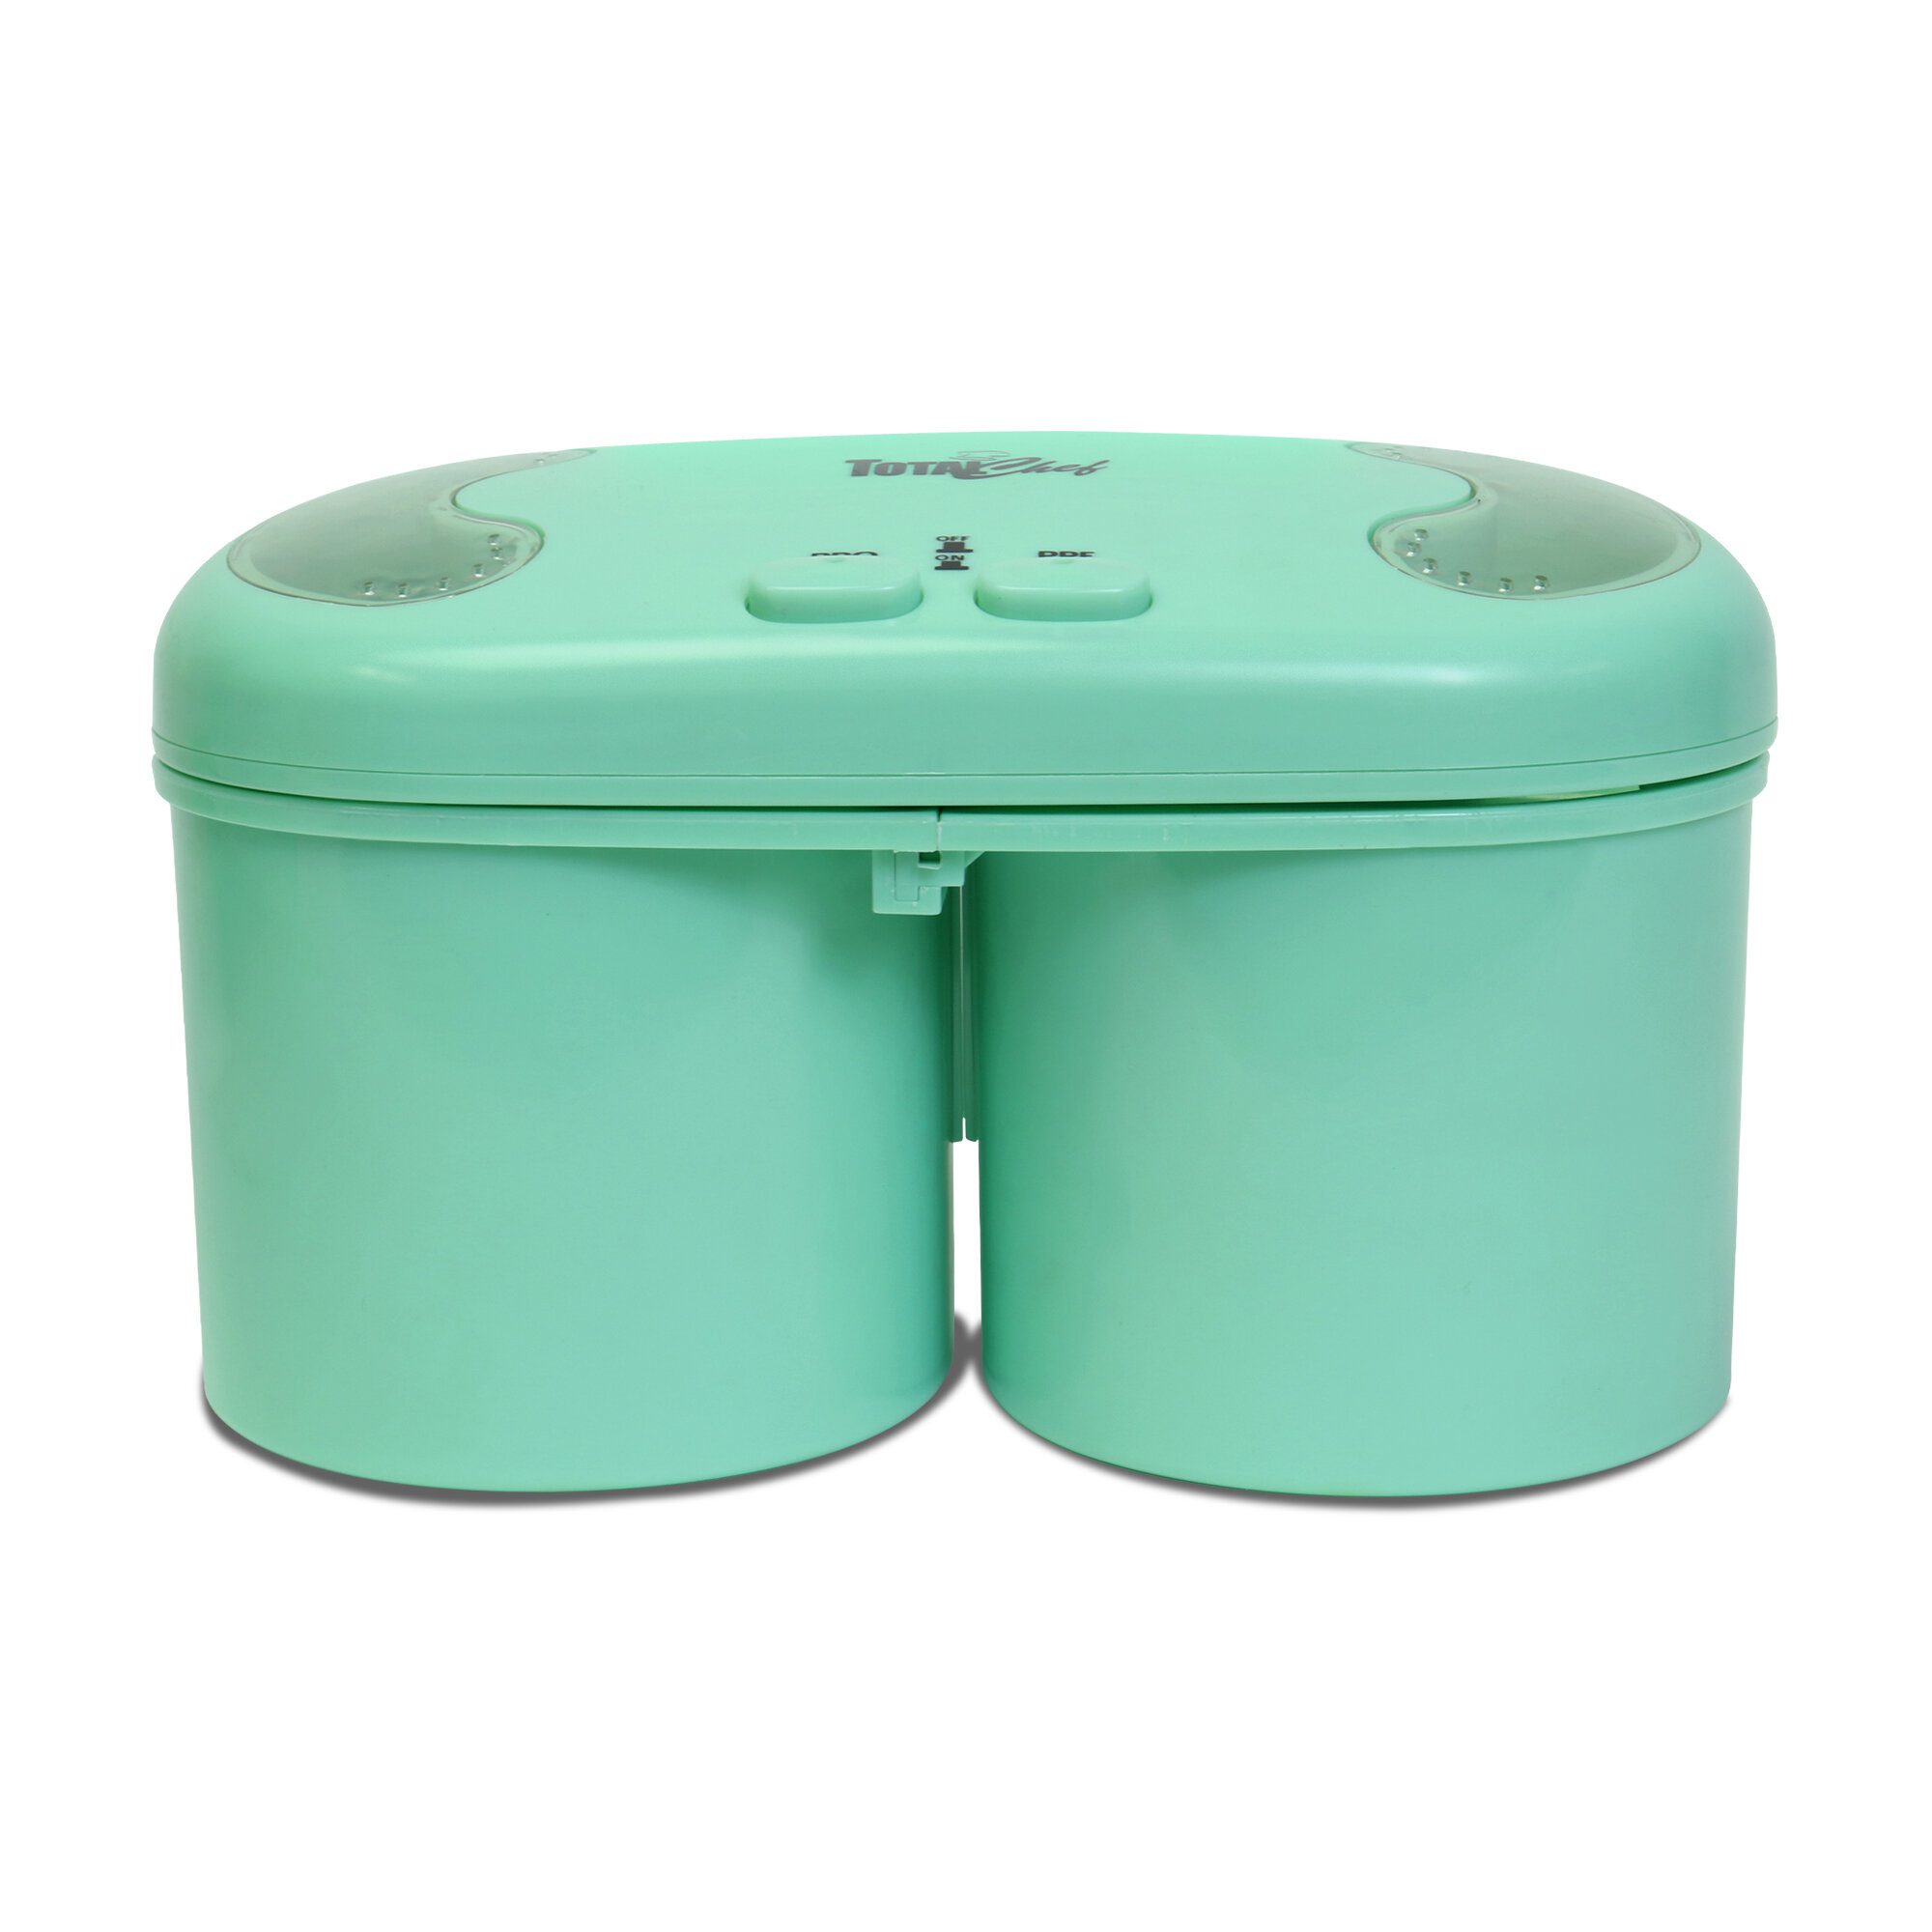 Ice Cream Containers for Homemade Ice Cream - 2 1.5 Quart (2 containers)  Green